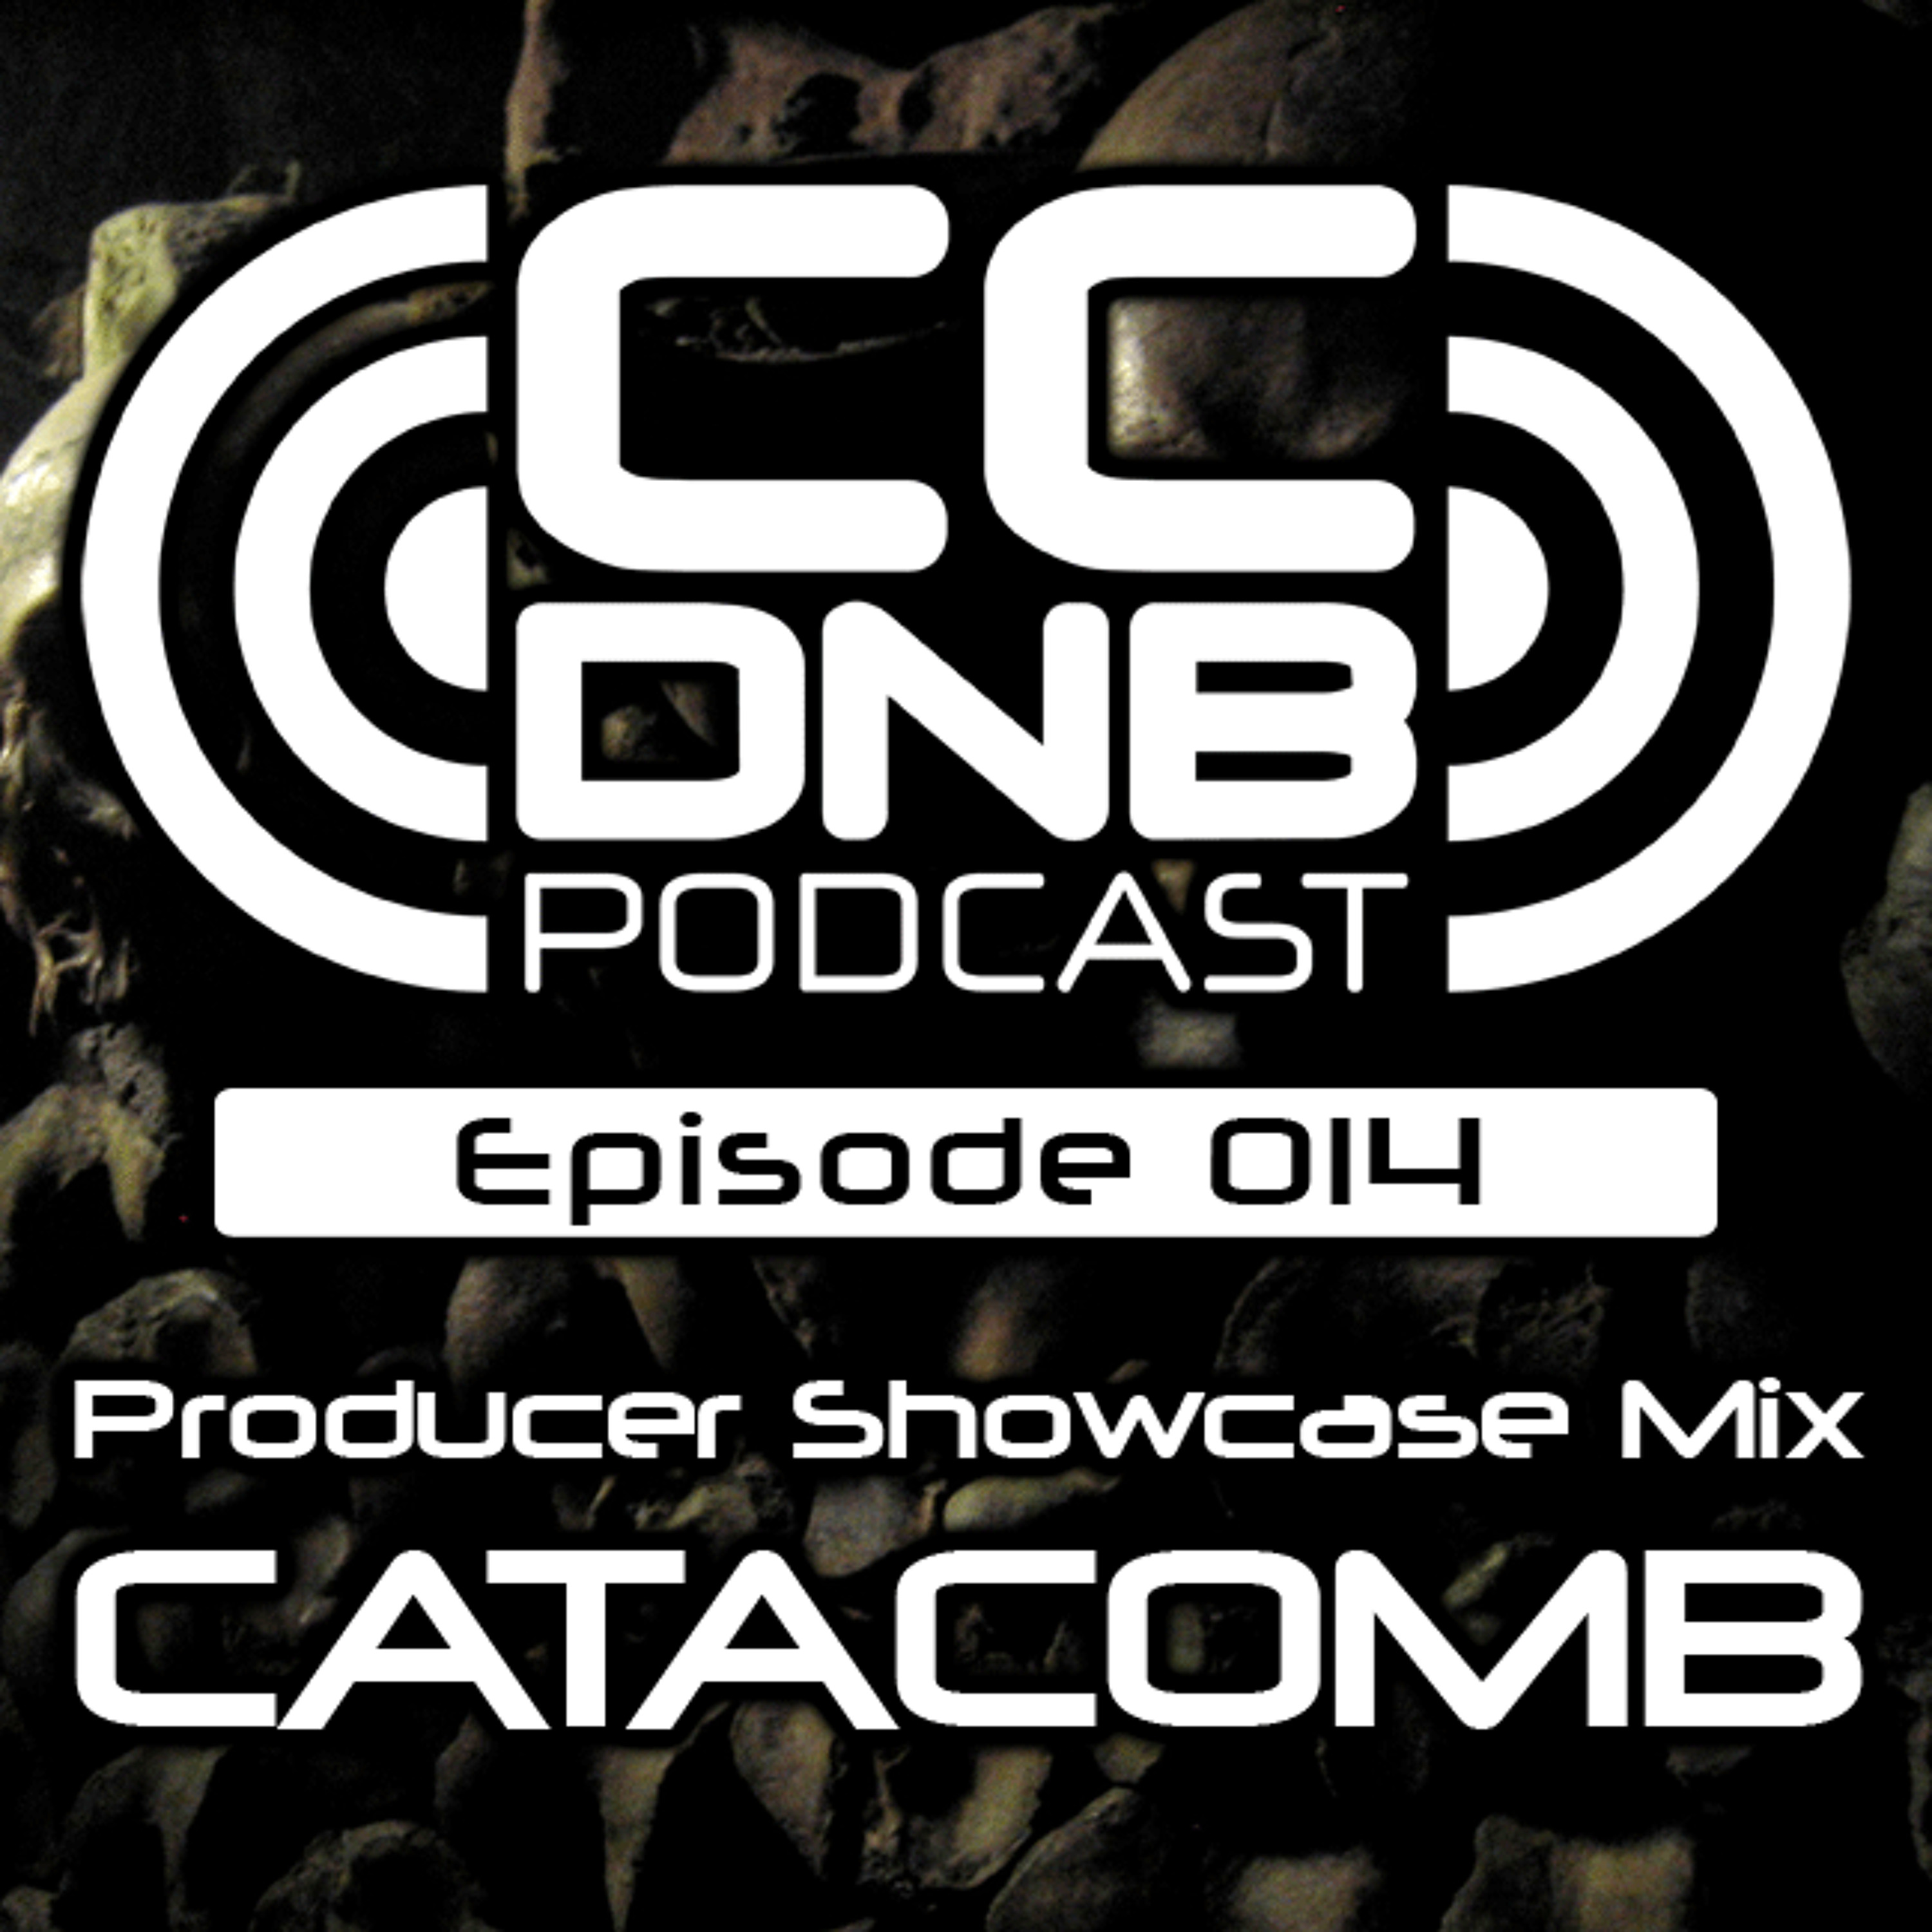 CCDNB 014 Producer Showcase mix featuring Catacomb